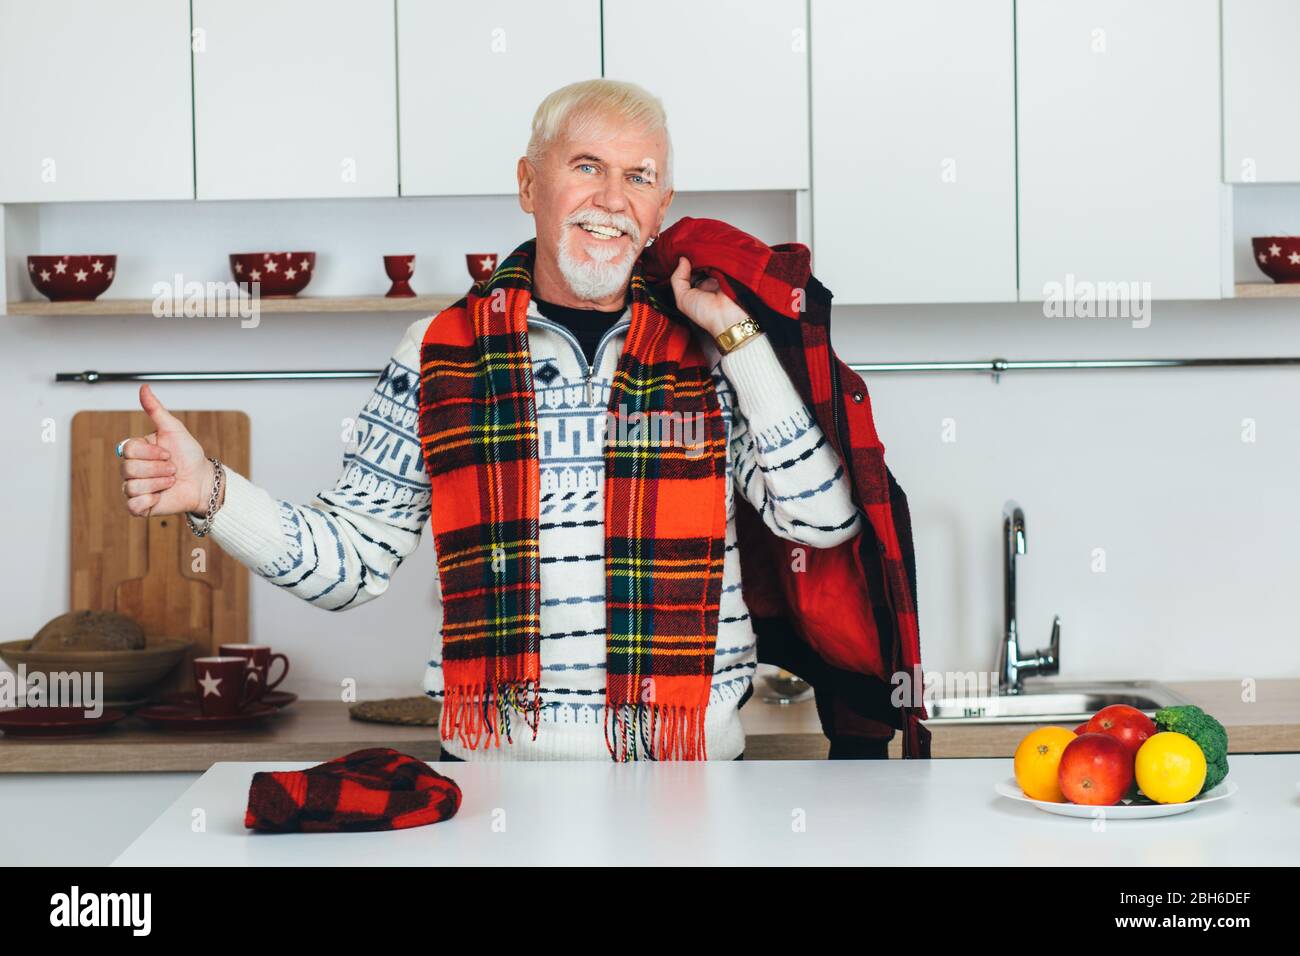 elderly man standing in outerwear, checkered scarf at home in the kitchen, looking at camera smiling and showing thumbs up Stock Photo